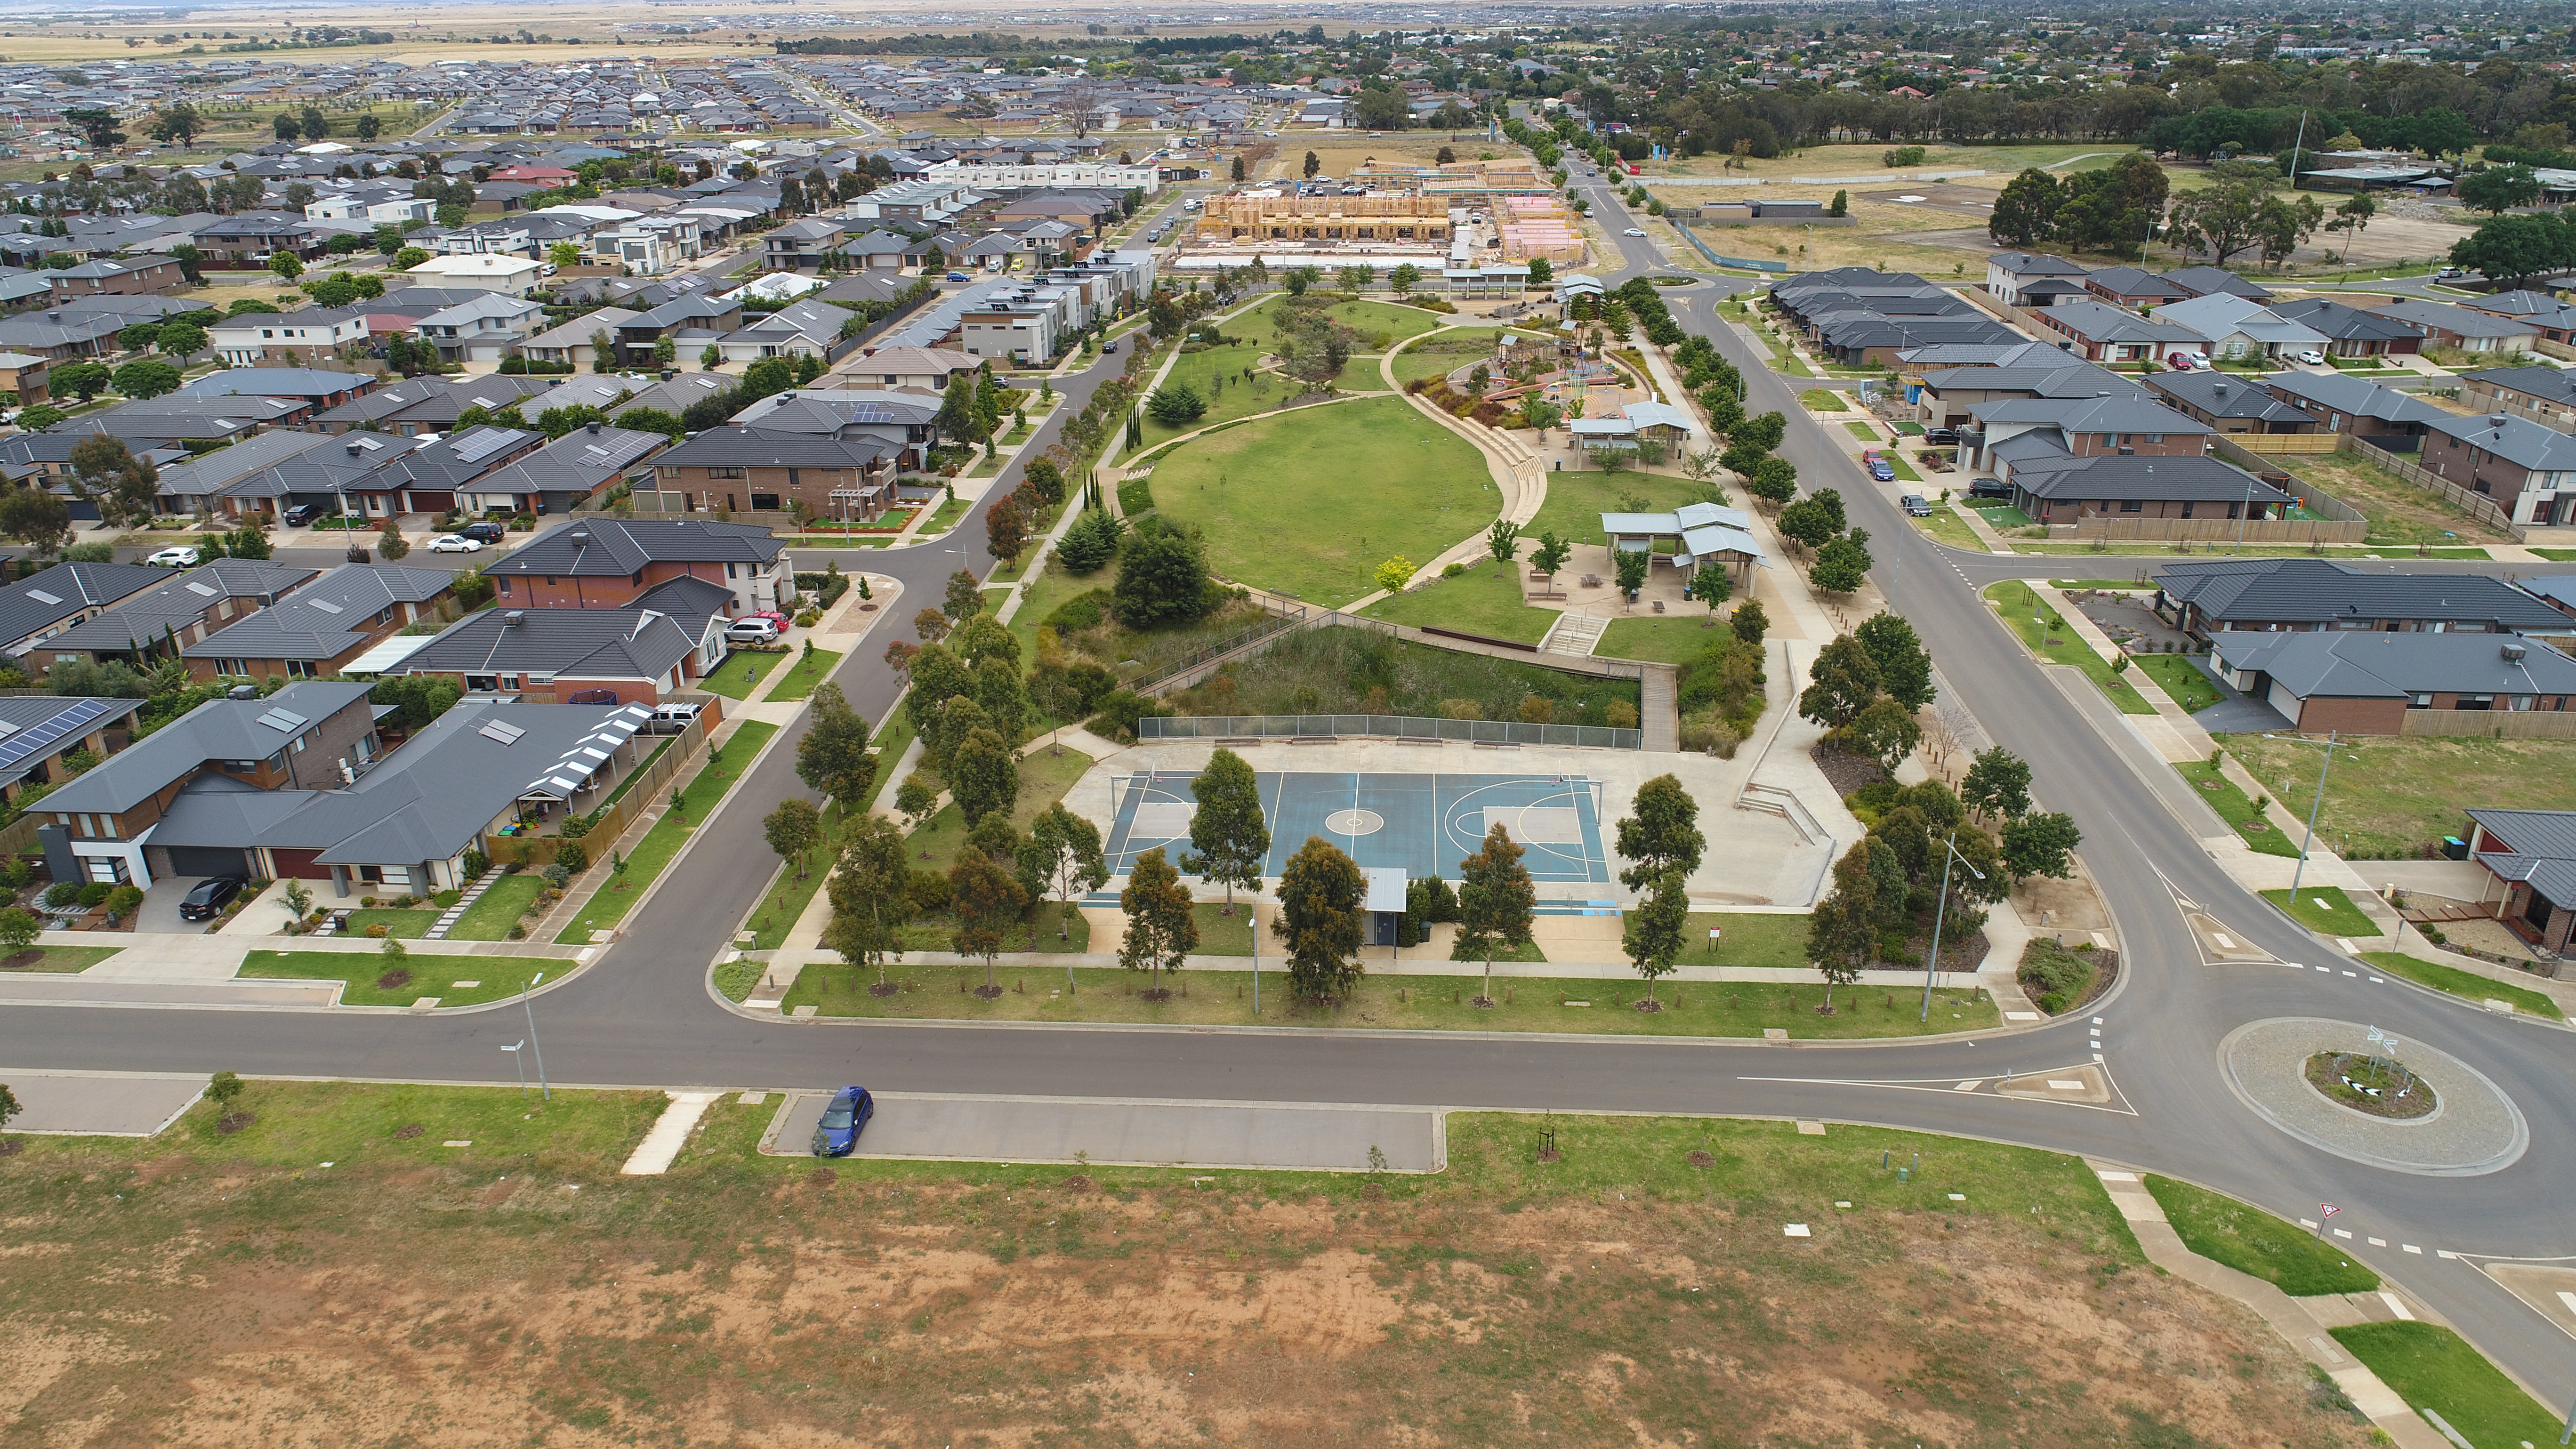 An aerial view of a park with basketball courts and houses around at Riverwalk Werribee